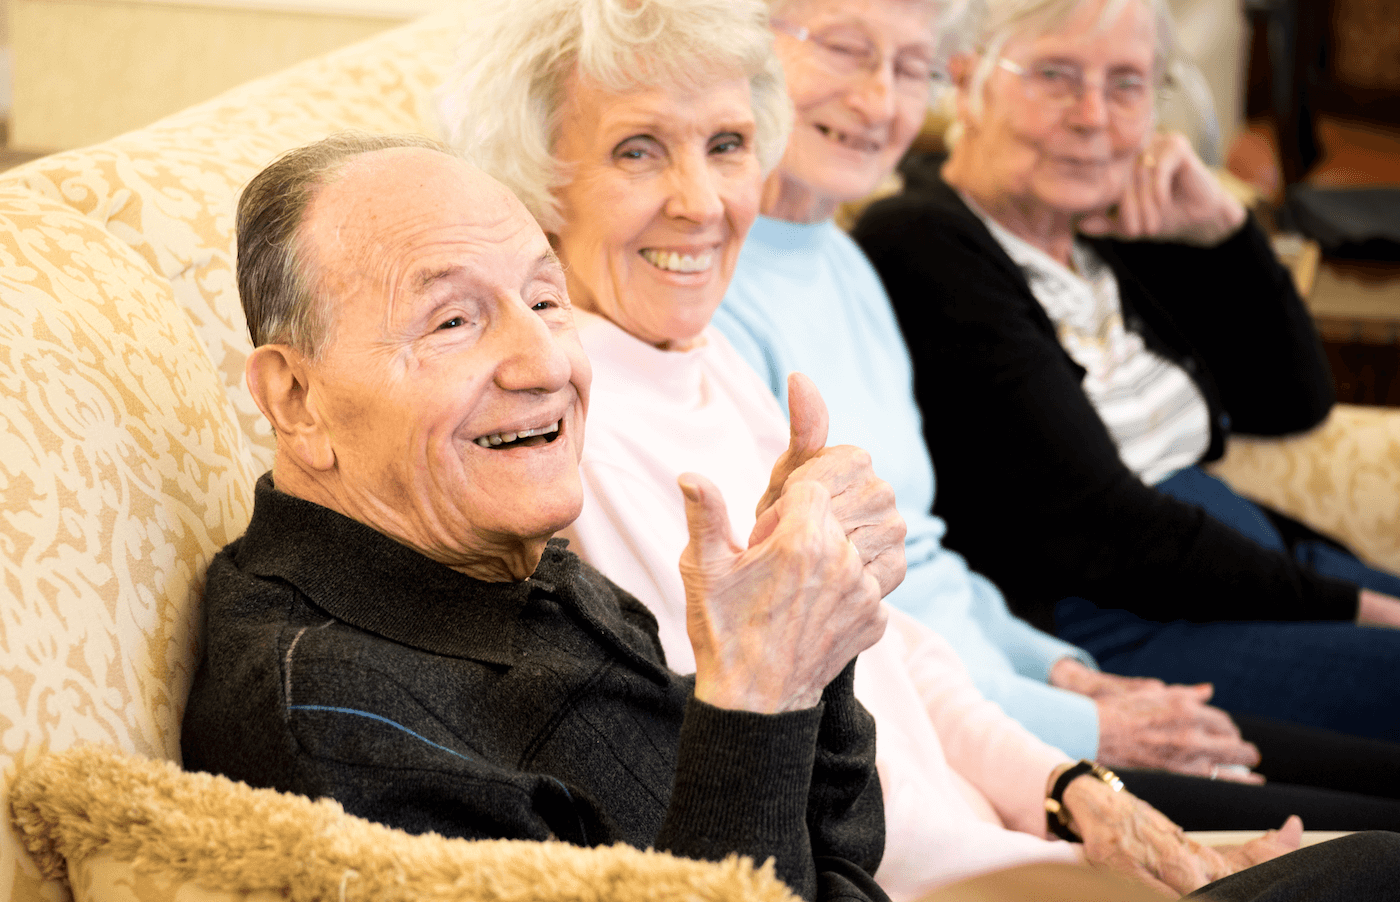 a group of four senior residents seated on a couch, and the foremost man is giving a thumbs-up